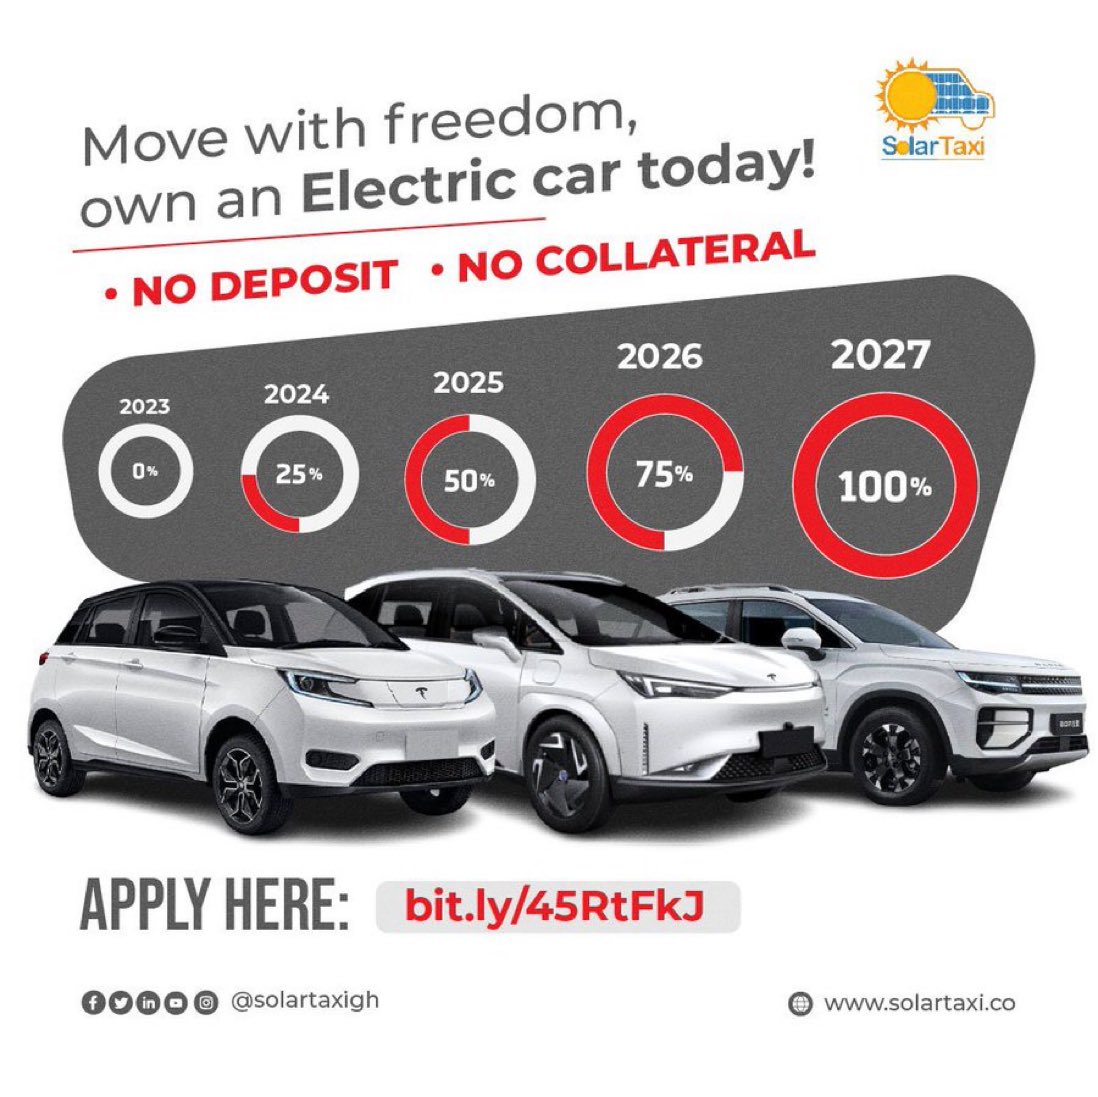 Driving Electric ⚡️ Car is now easy
No deposit required.. with 5 years payment plan..

Just place your order and Drive!

Apply here: bit.ly/45RtFkJ
#SolarTaxi #electrical
 #driveev